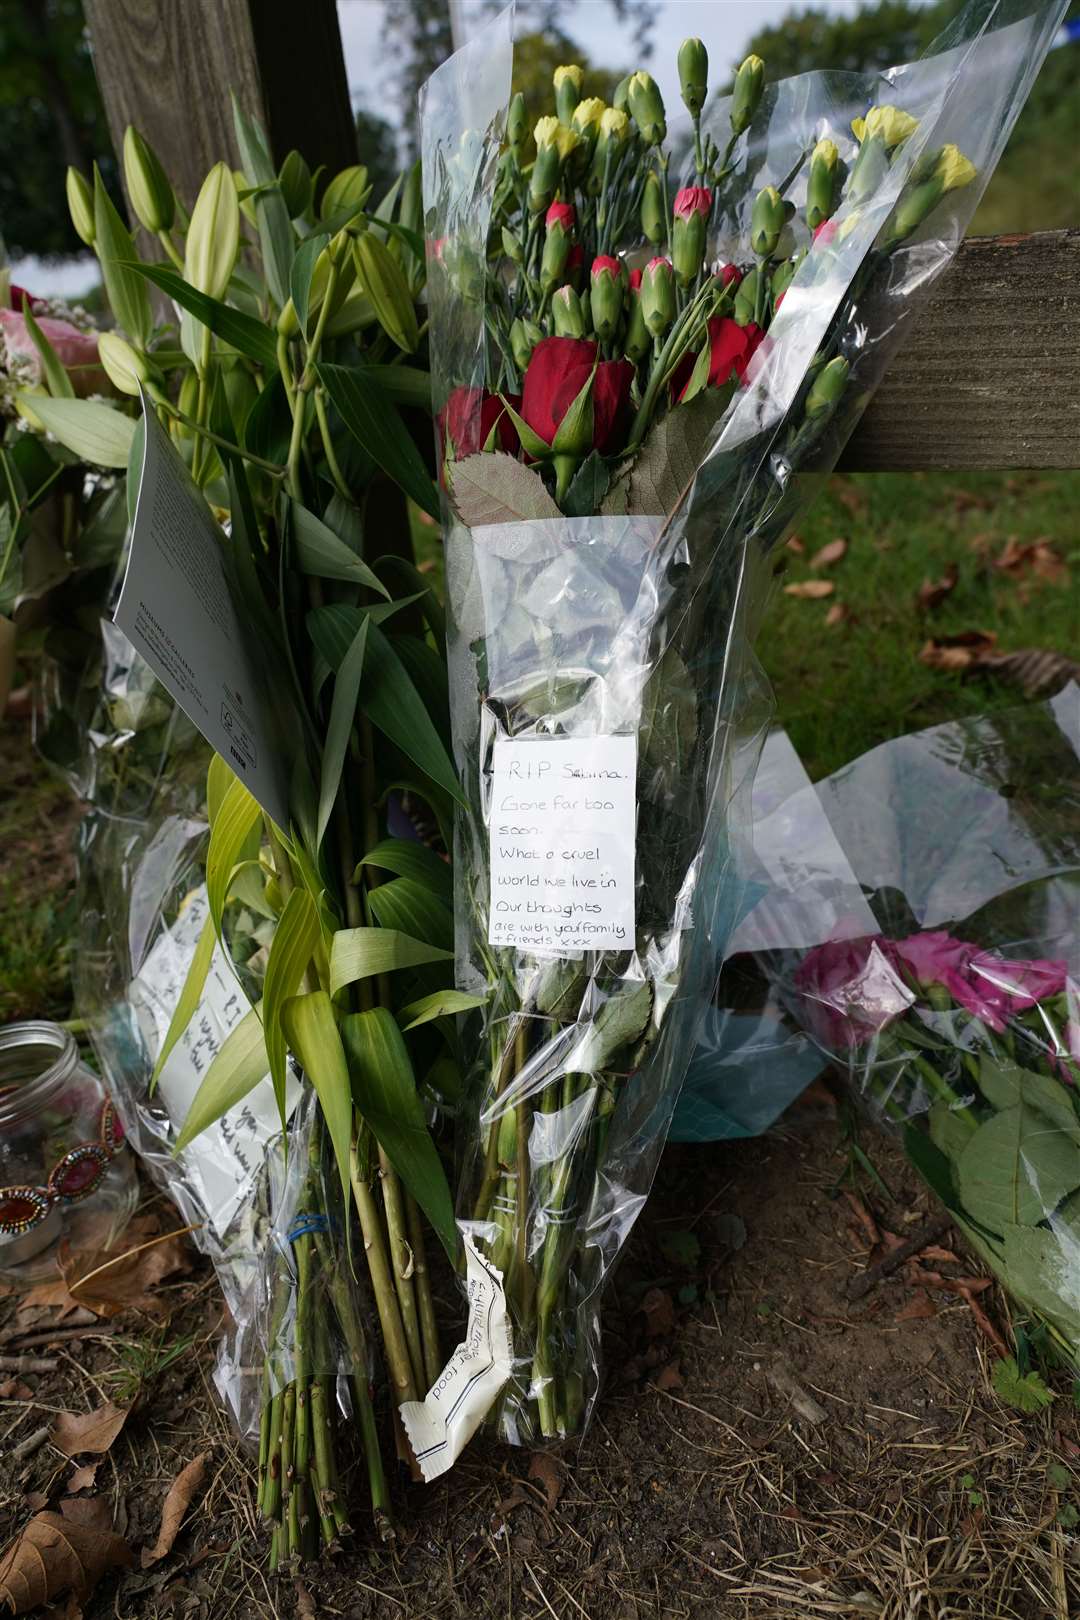 Floral tributes at Cator Park in Kidbrooke, south London, near to the scene where the body of Sabina Nessa was found (Ian West/PA)